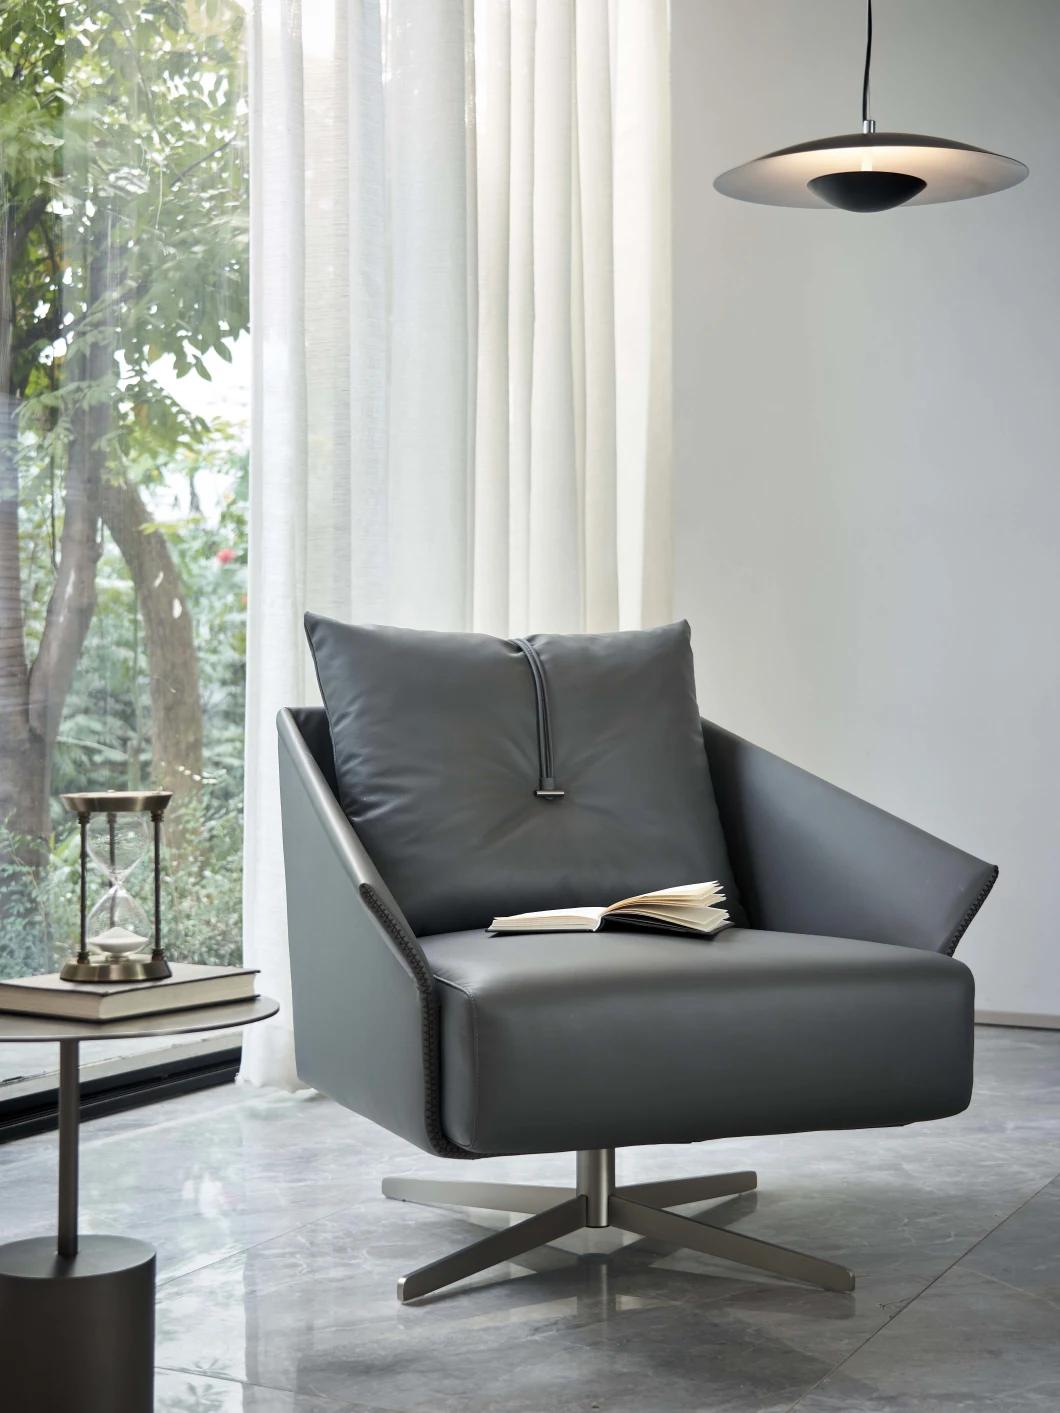 Dr917 Italian Design Leather Leisure Chair, Latest Modern Design in Home Furniture and Hotel Furniture Customization